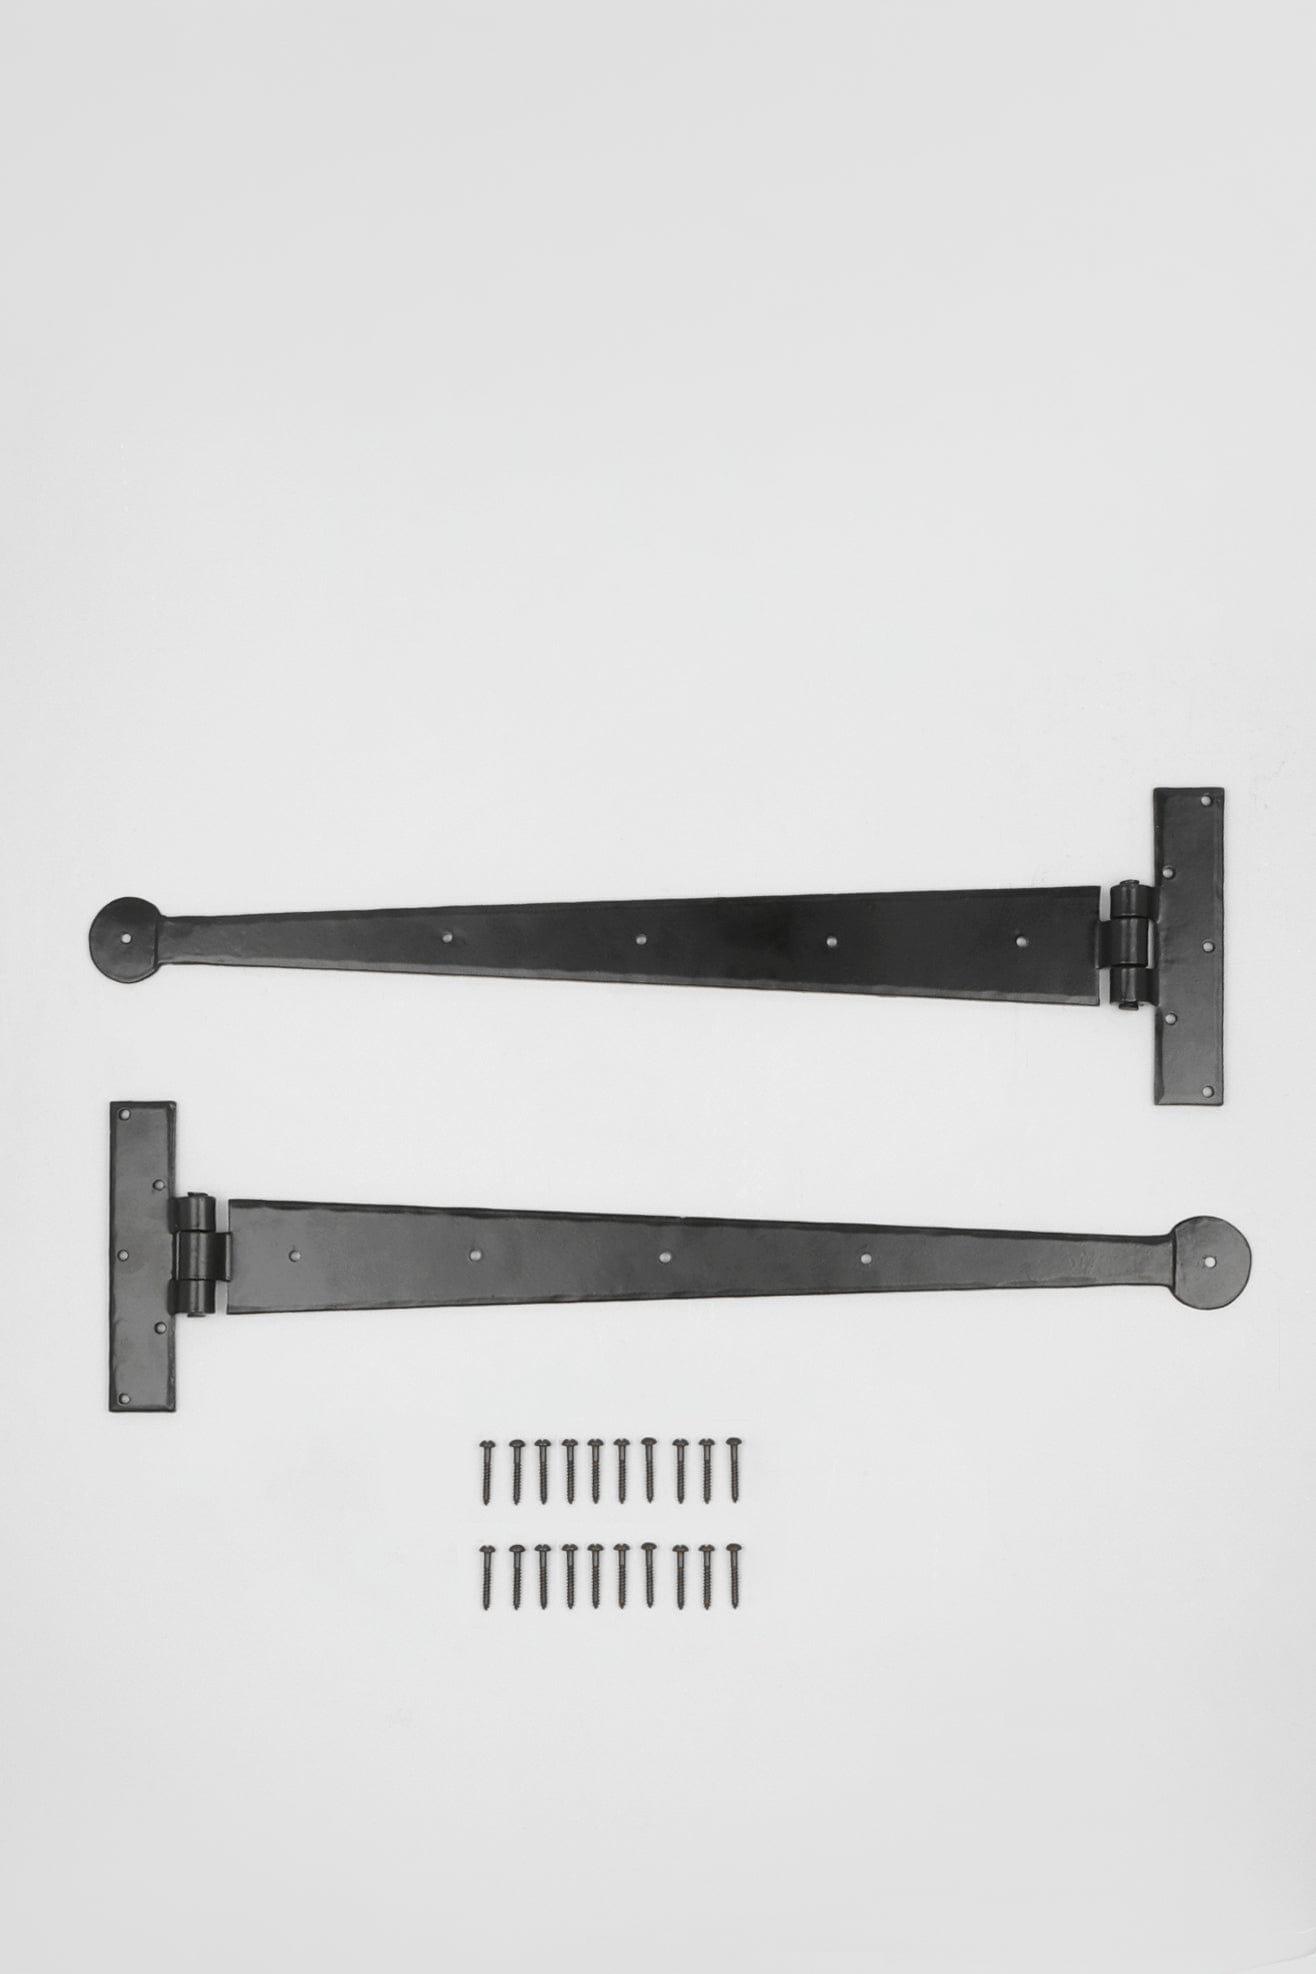 G Decor Hinges Set of 2 / Black Hand Forged Tee Hinge 18" Penny T Hinge Traditional Black Solid Metal Pair